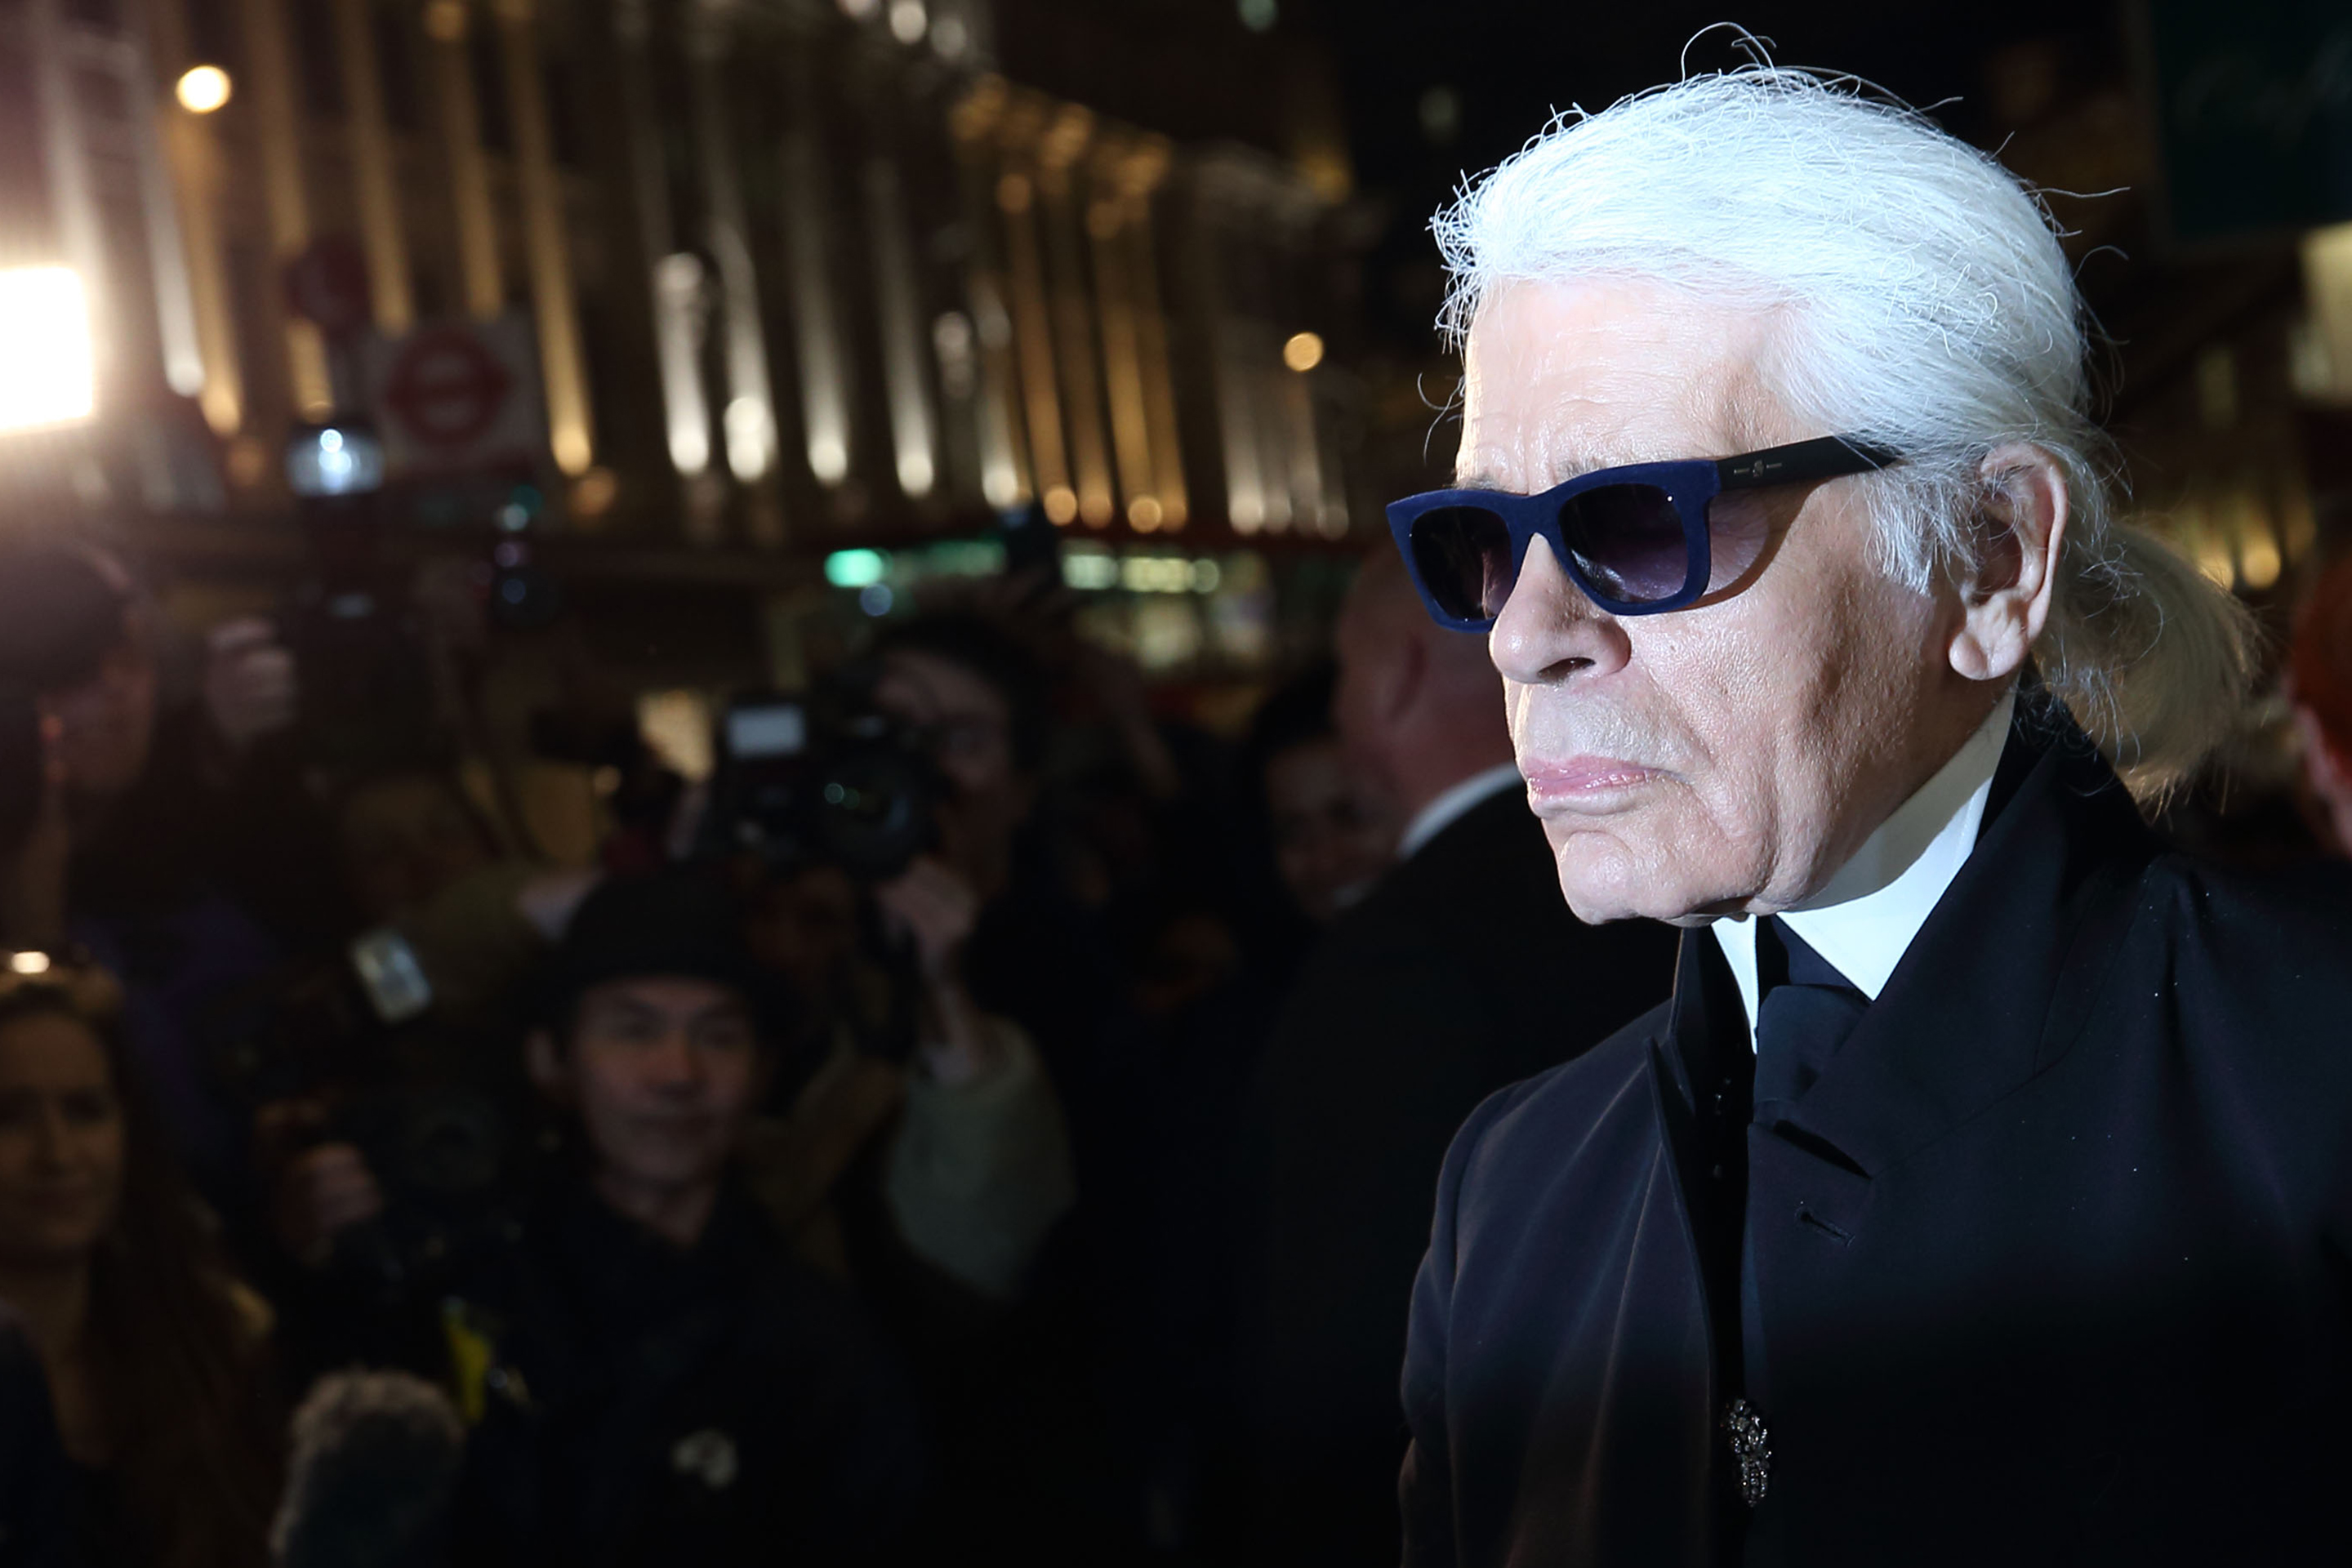 Karl Lagerfeld Lived in Extravagant Mansions, Sold $1,800 Keychains and Owned a Wealthy Cat. Here's What We Know About His Money